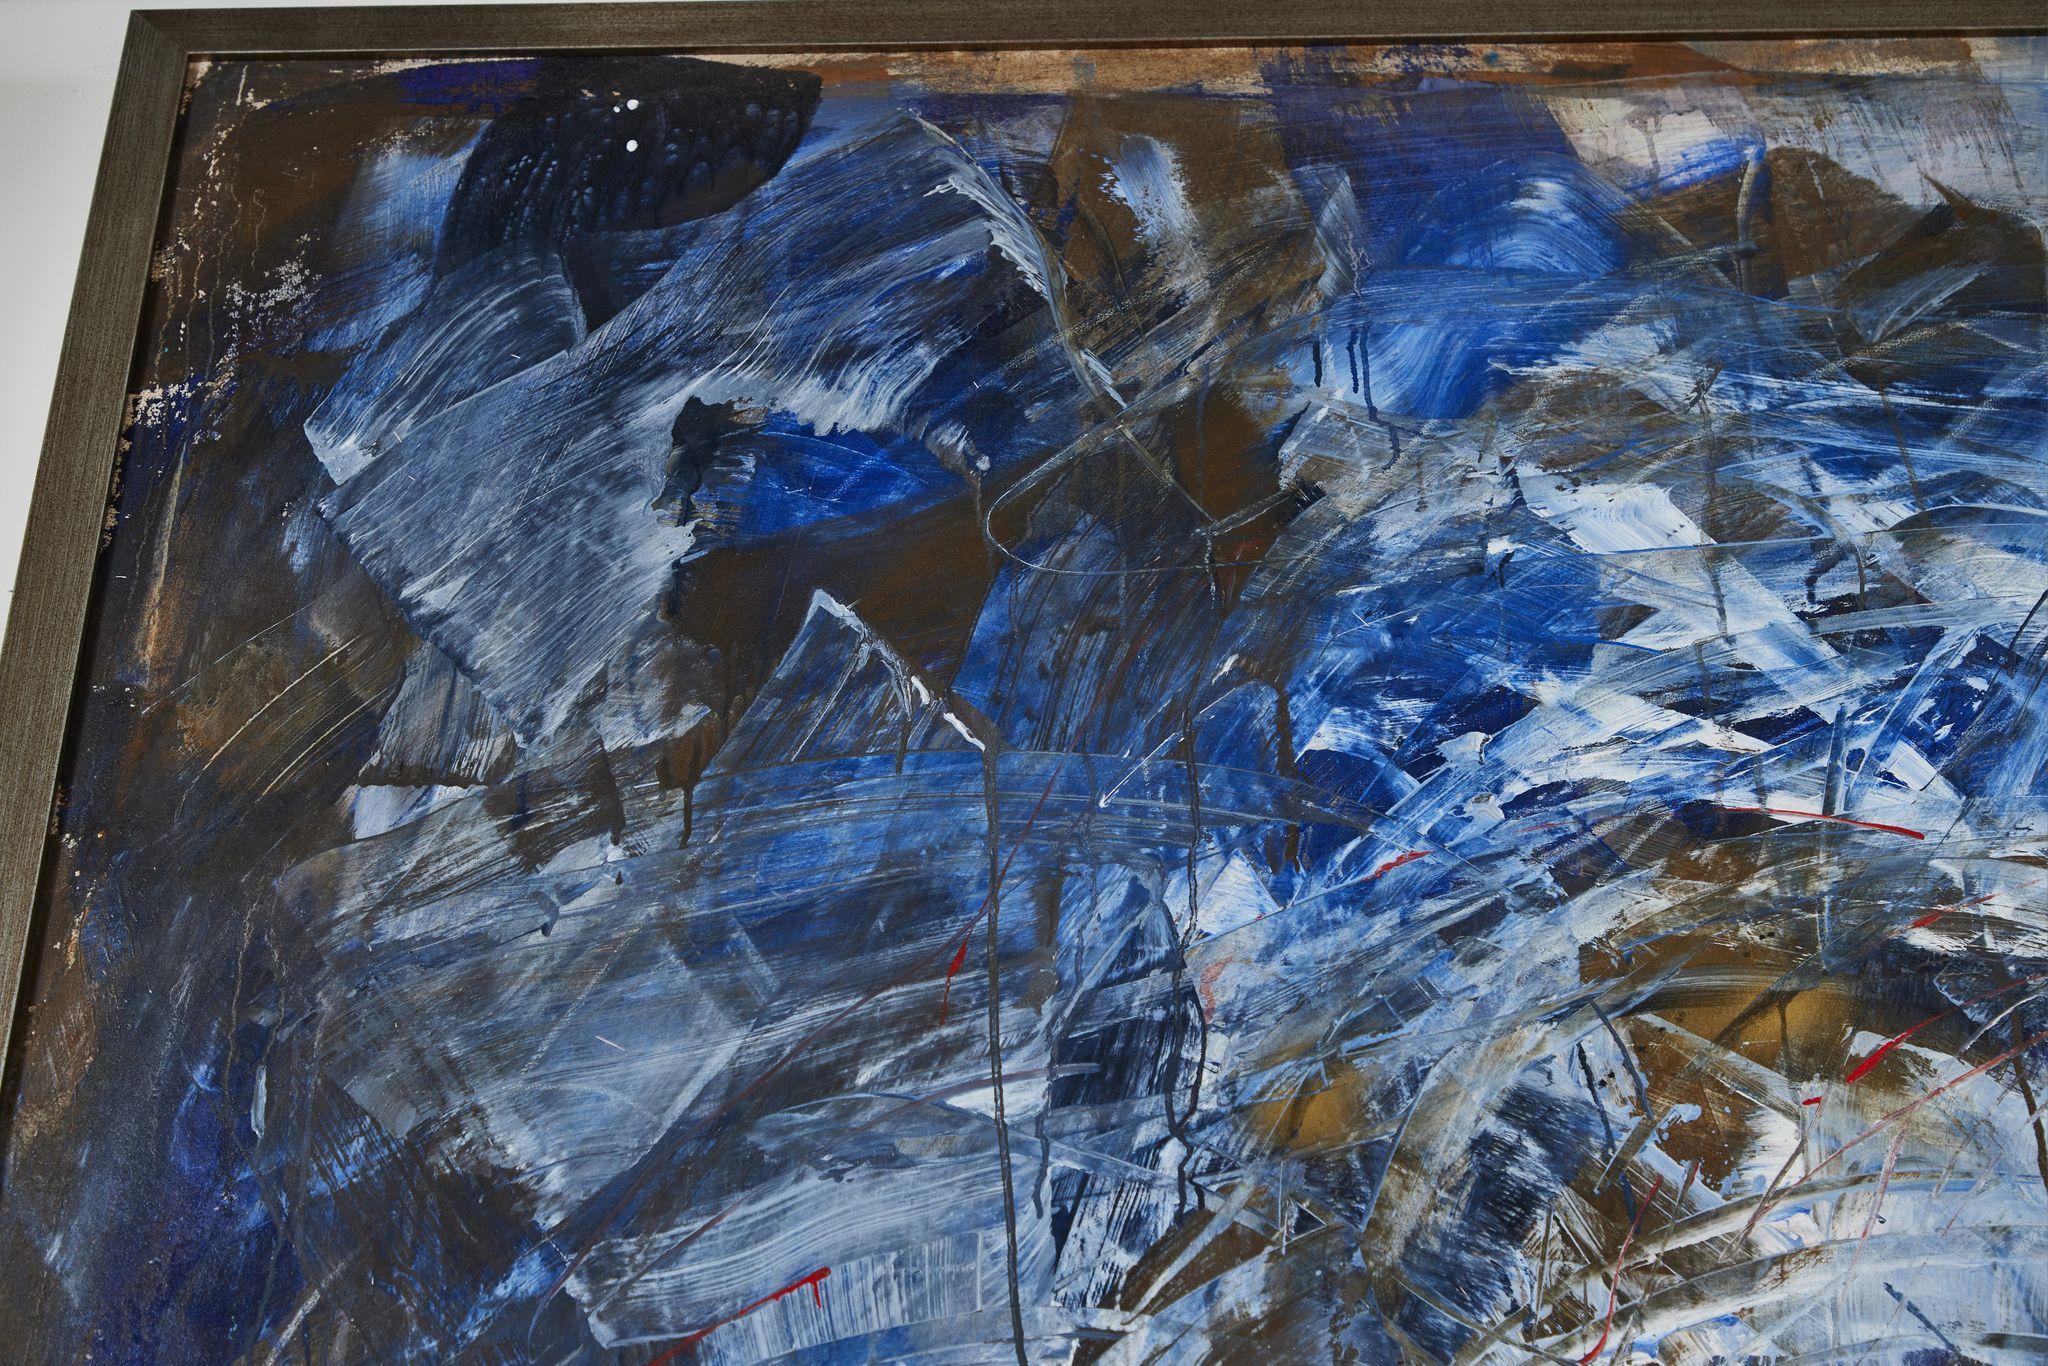 A grand-scale, signed and dated, hand-painted, expressive oil-on-canvas painting by listed French artist, Dominique Dehais (b. 1950). The vivid composition in cobalt, white, gray and black, held in a bespoke, silver gilded frame. Dehais is a